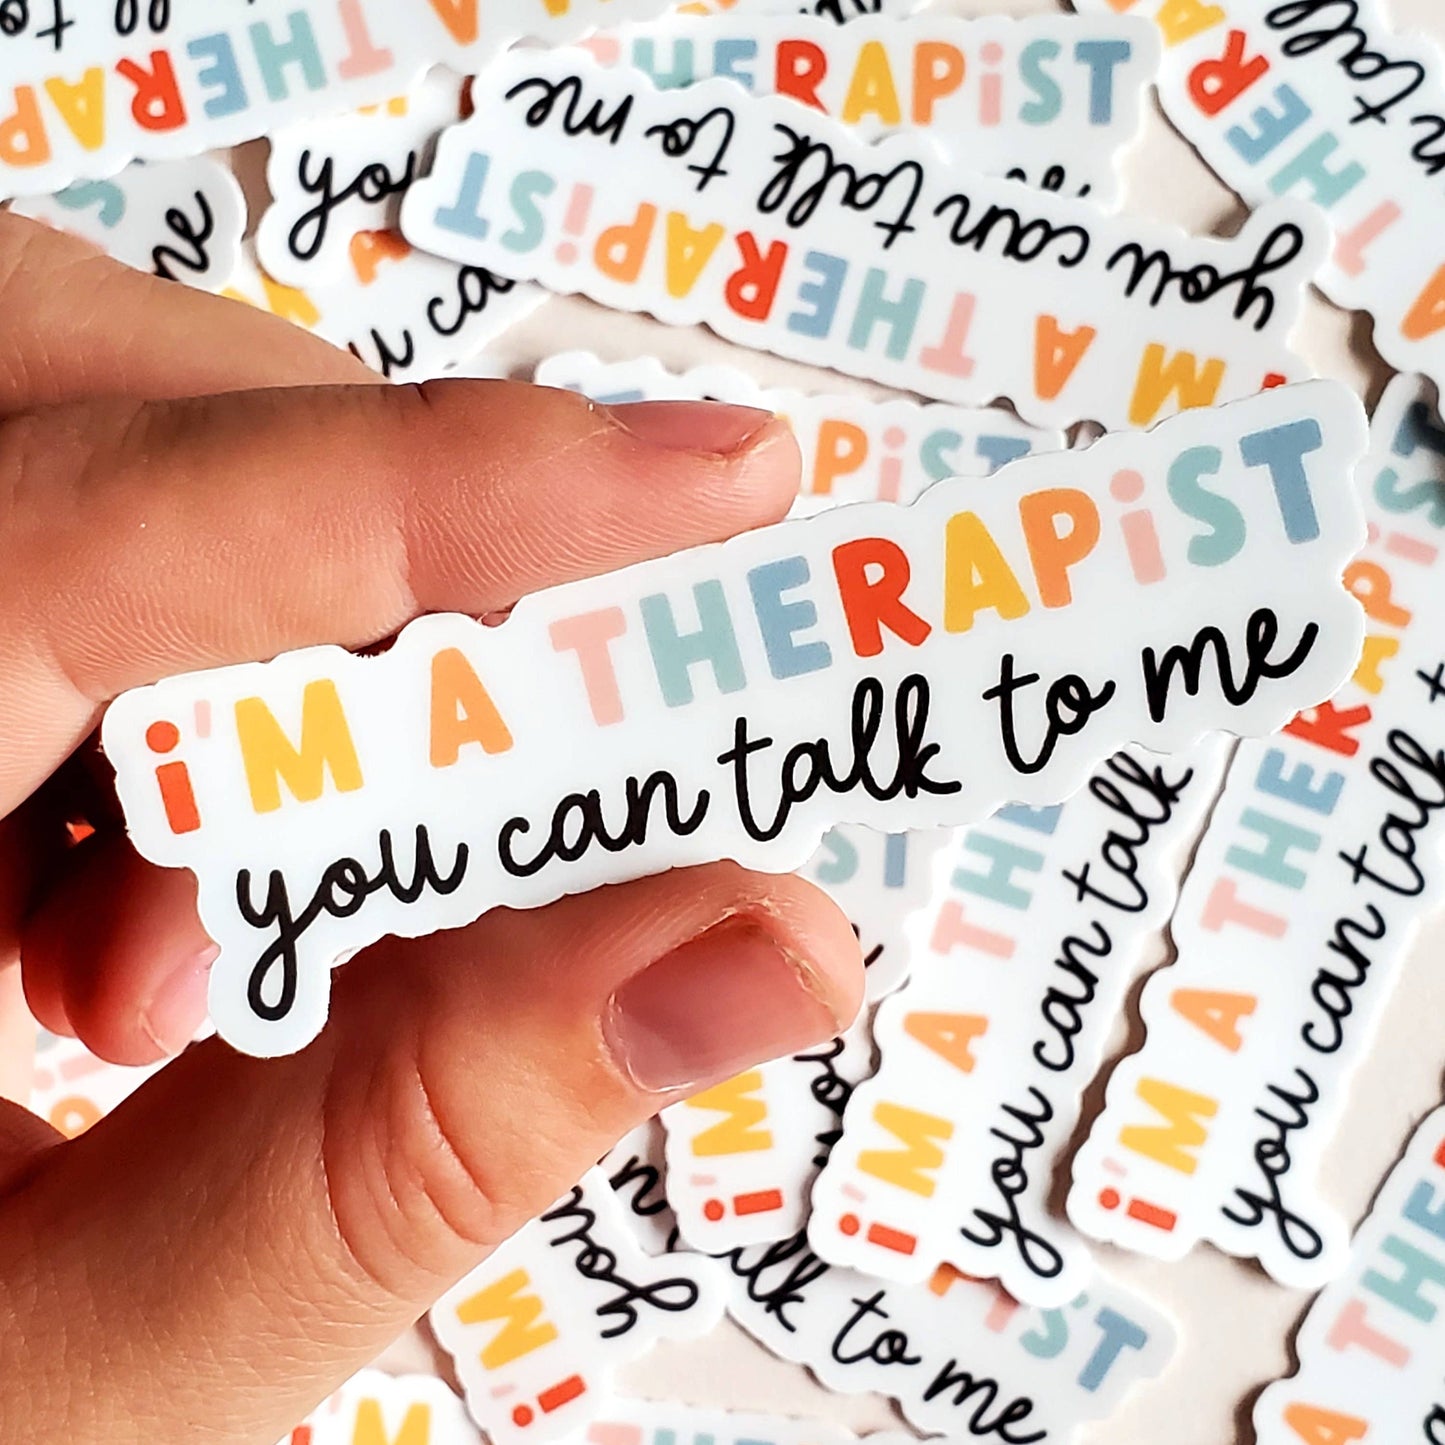 I'm A Therapist, You Can Talk To Me Vinyl Sticker